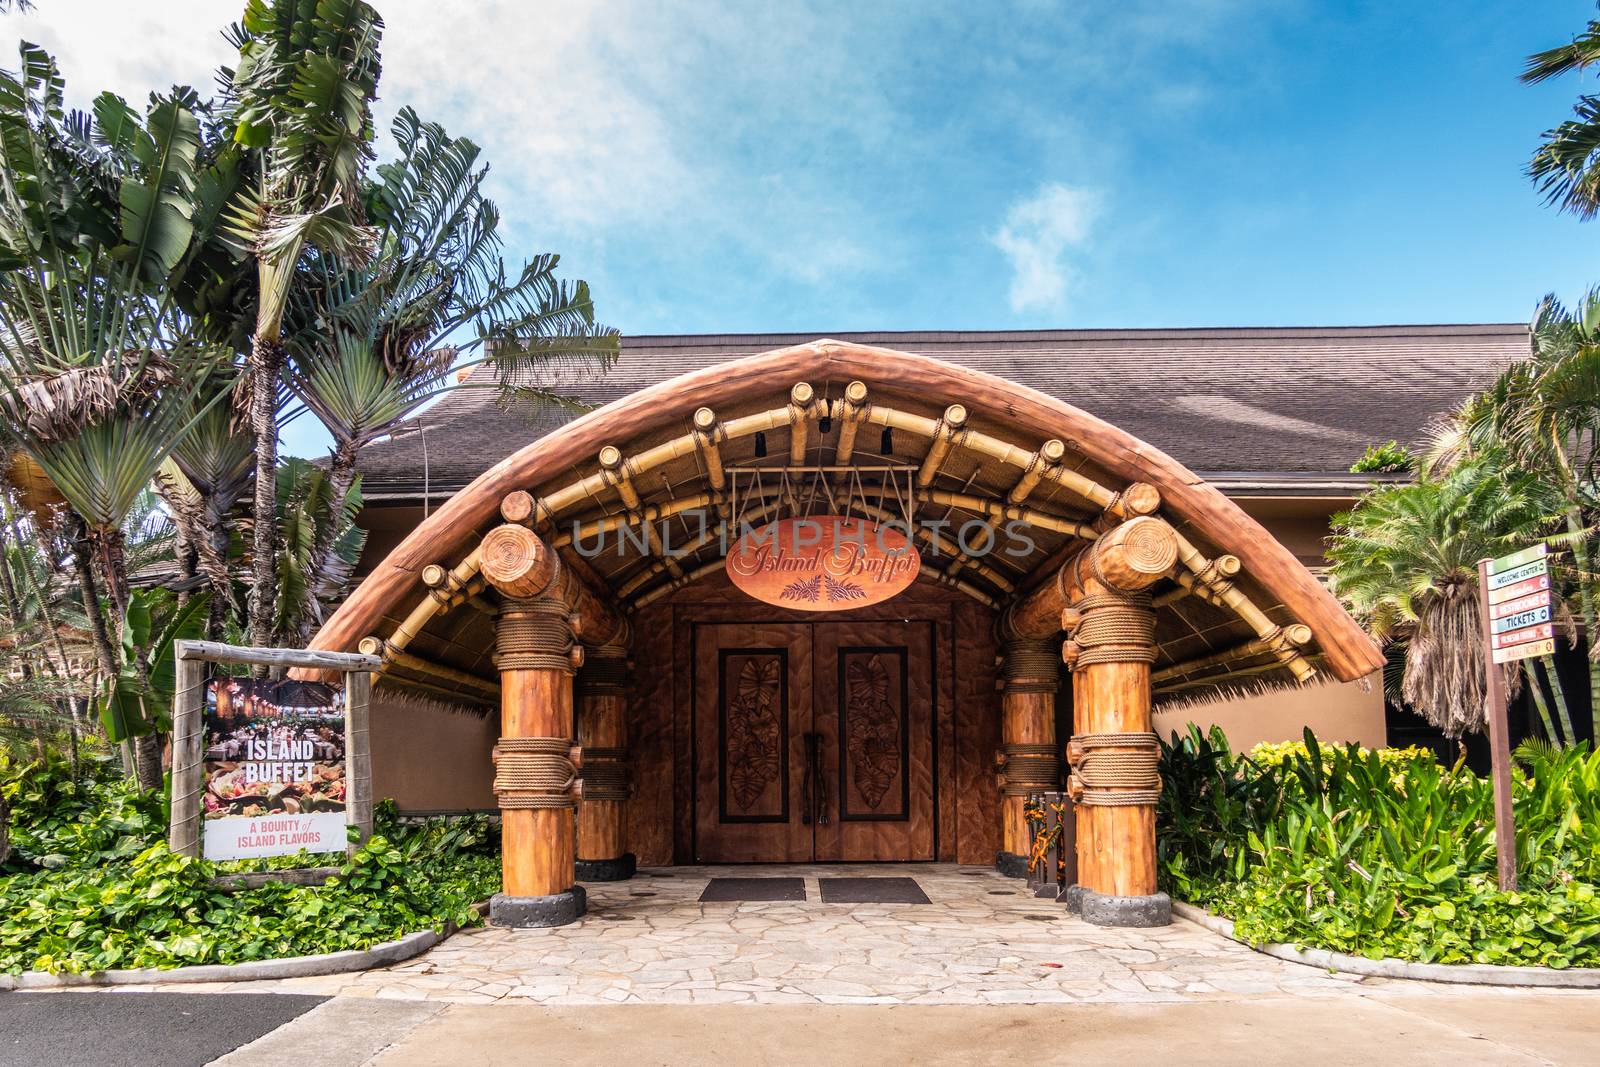 Laie, Oahu, Hawaii, USA. - January 09, 2020: Polynesian Cultural Center. Large wooden entrance to Island Buffet restaurant under blue sky with lots of green vegetation and foliage around.